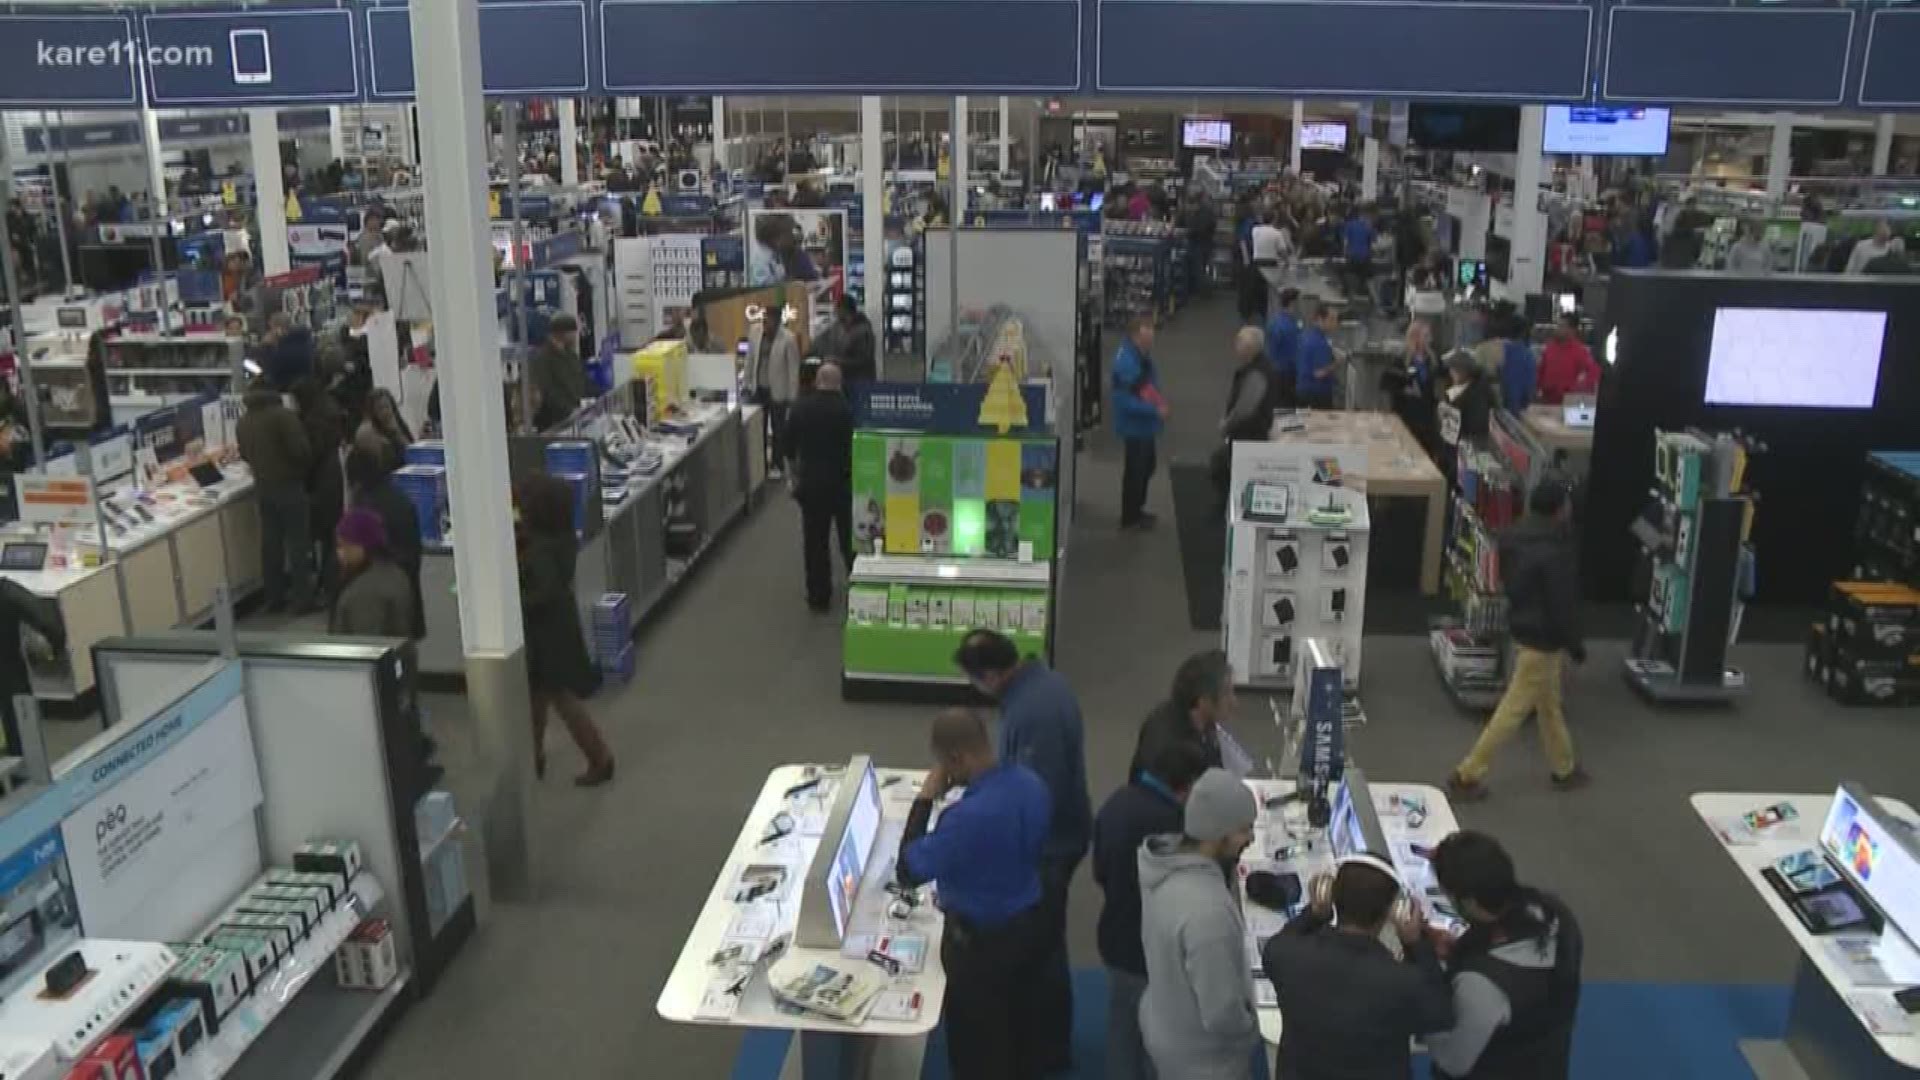 Many are wondering if we'll see changes under Barry's leadership.  A Best Buy spokesperson says customers and employees won't see a dramatic change.